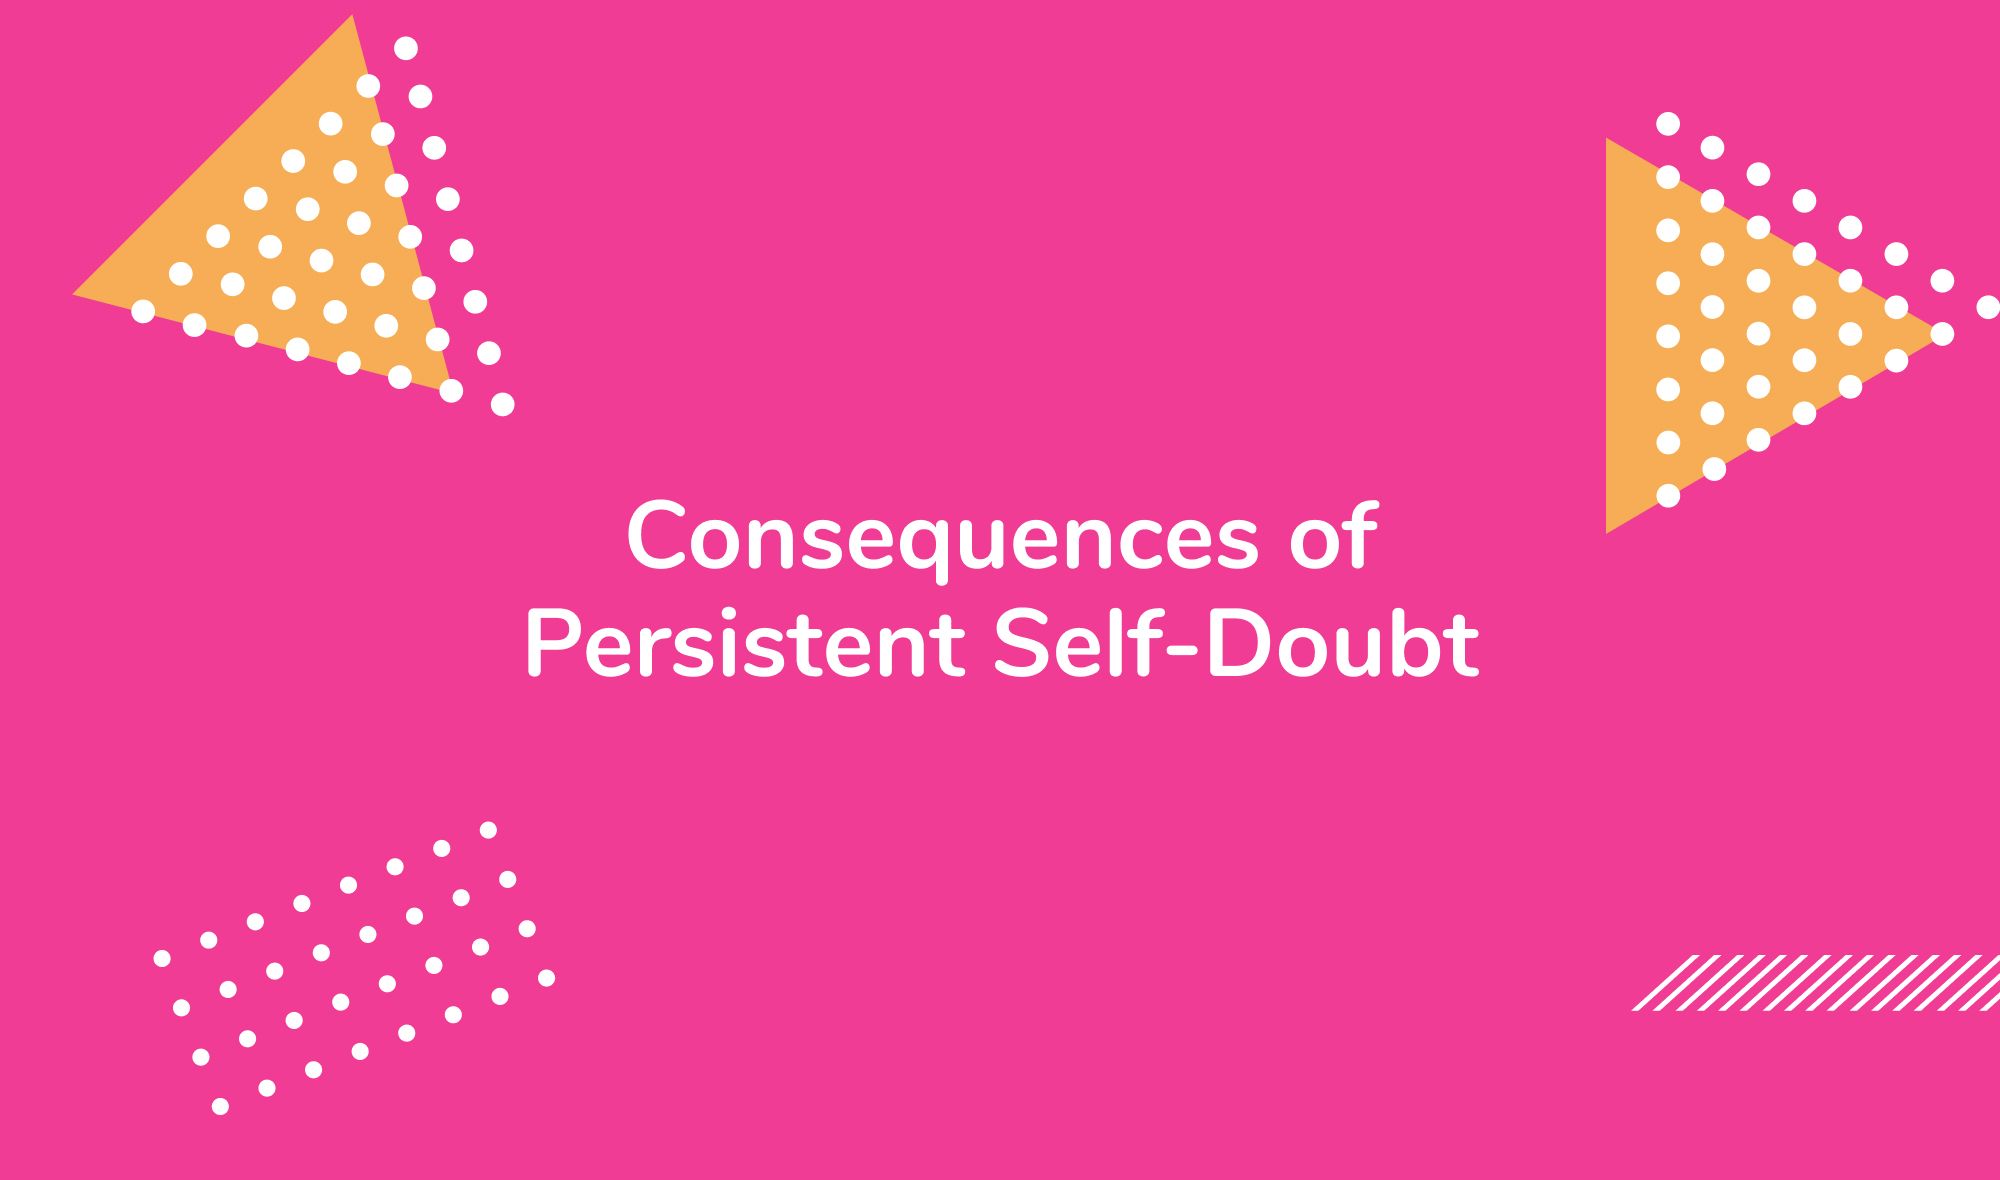 Consequences of Persistent Self-Doubt